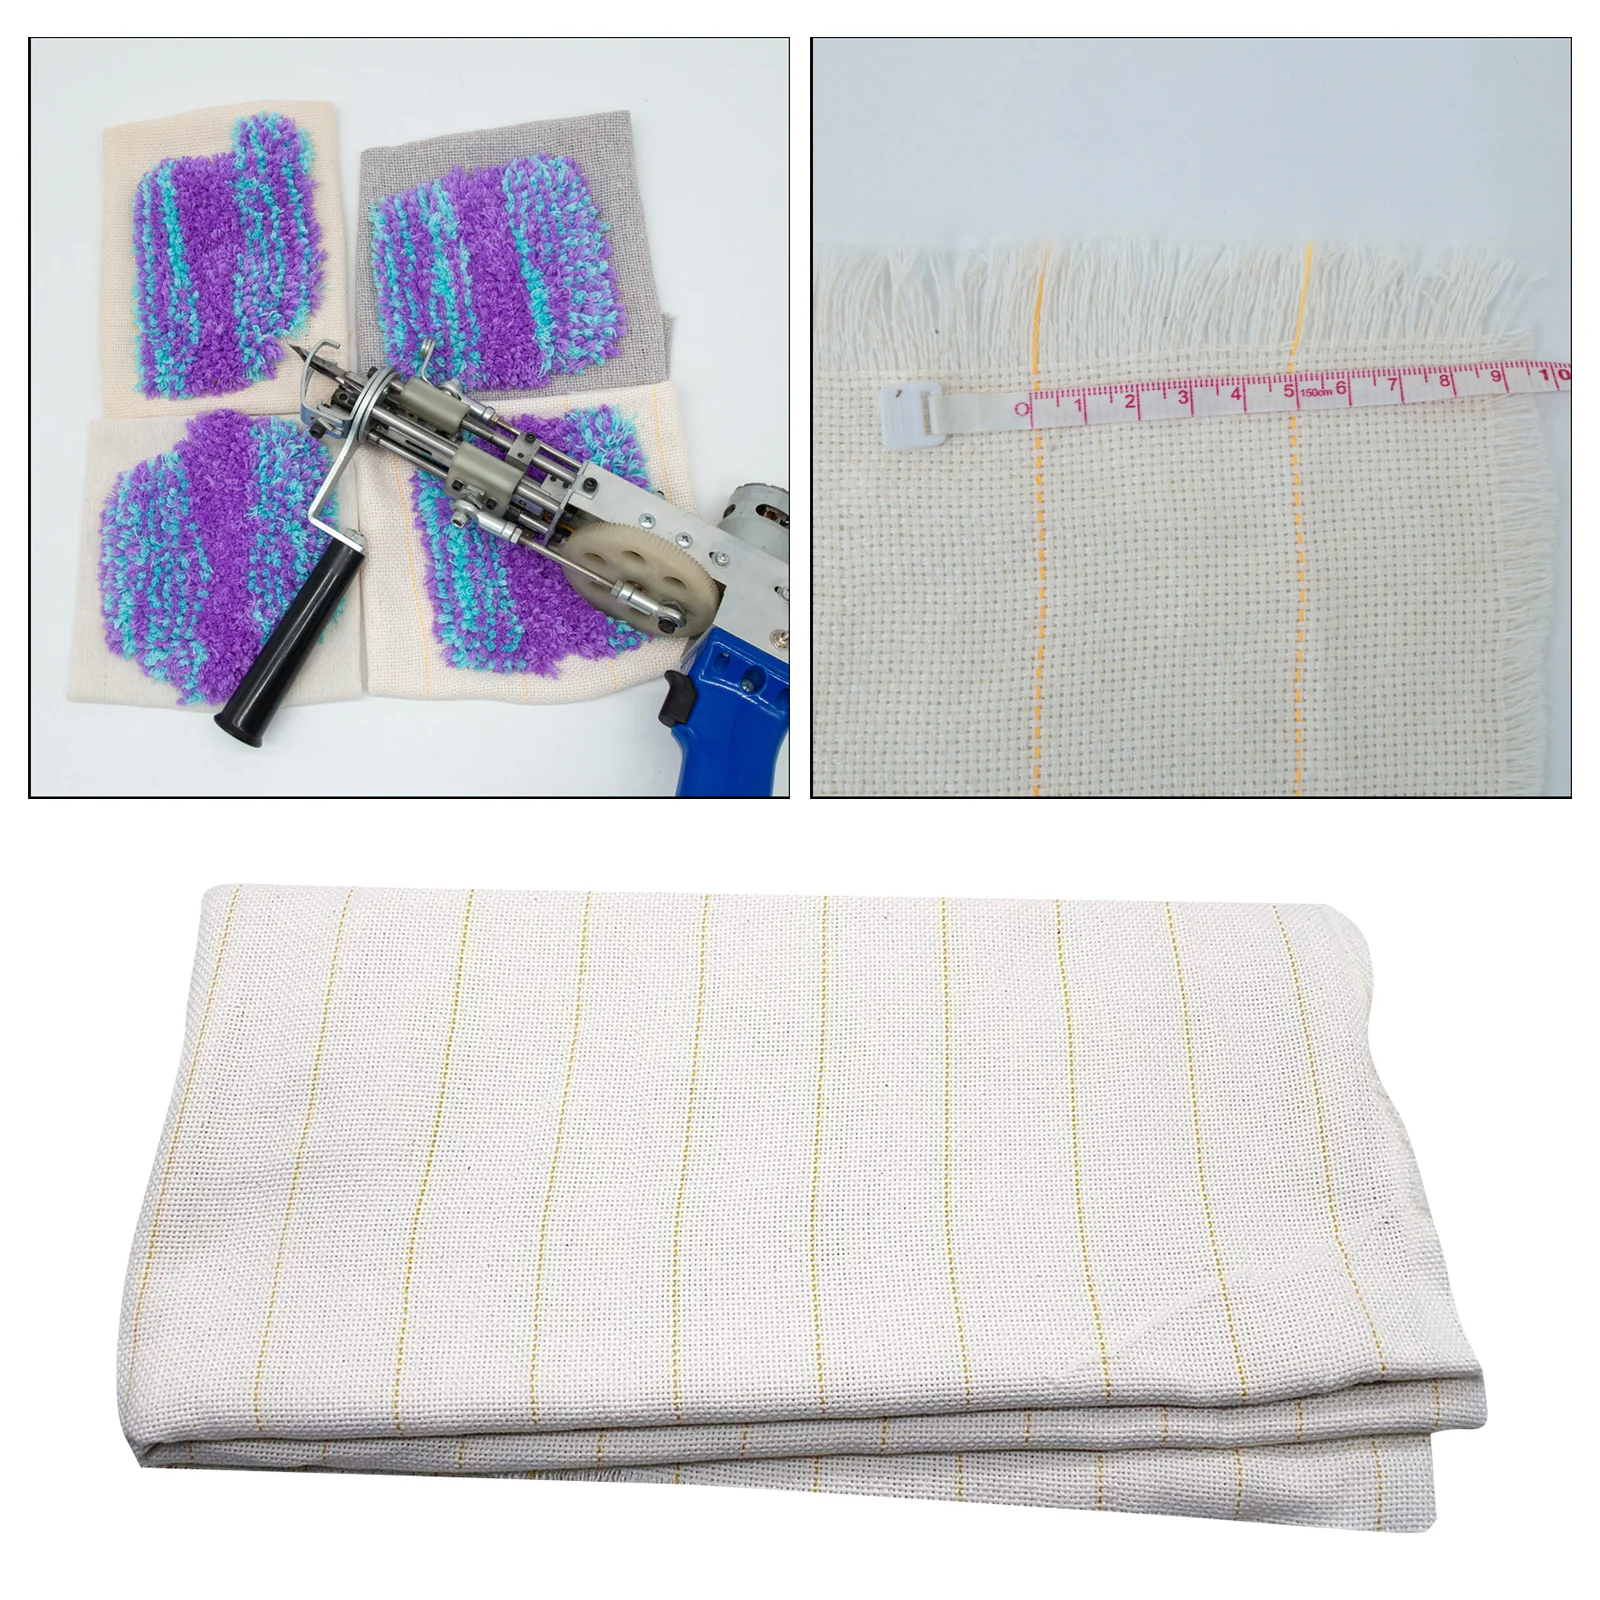 Primary Tufting Cloth Backing Fabric for Using Rug Tufting Guns DIY C arpet Tapestry Rug Making